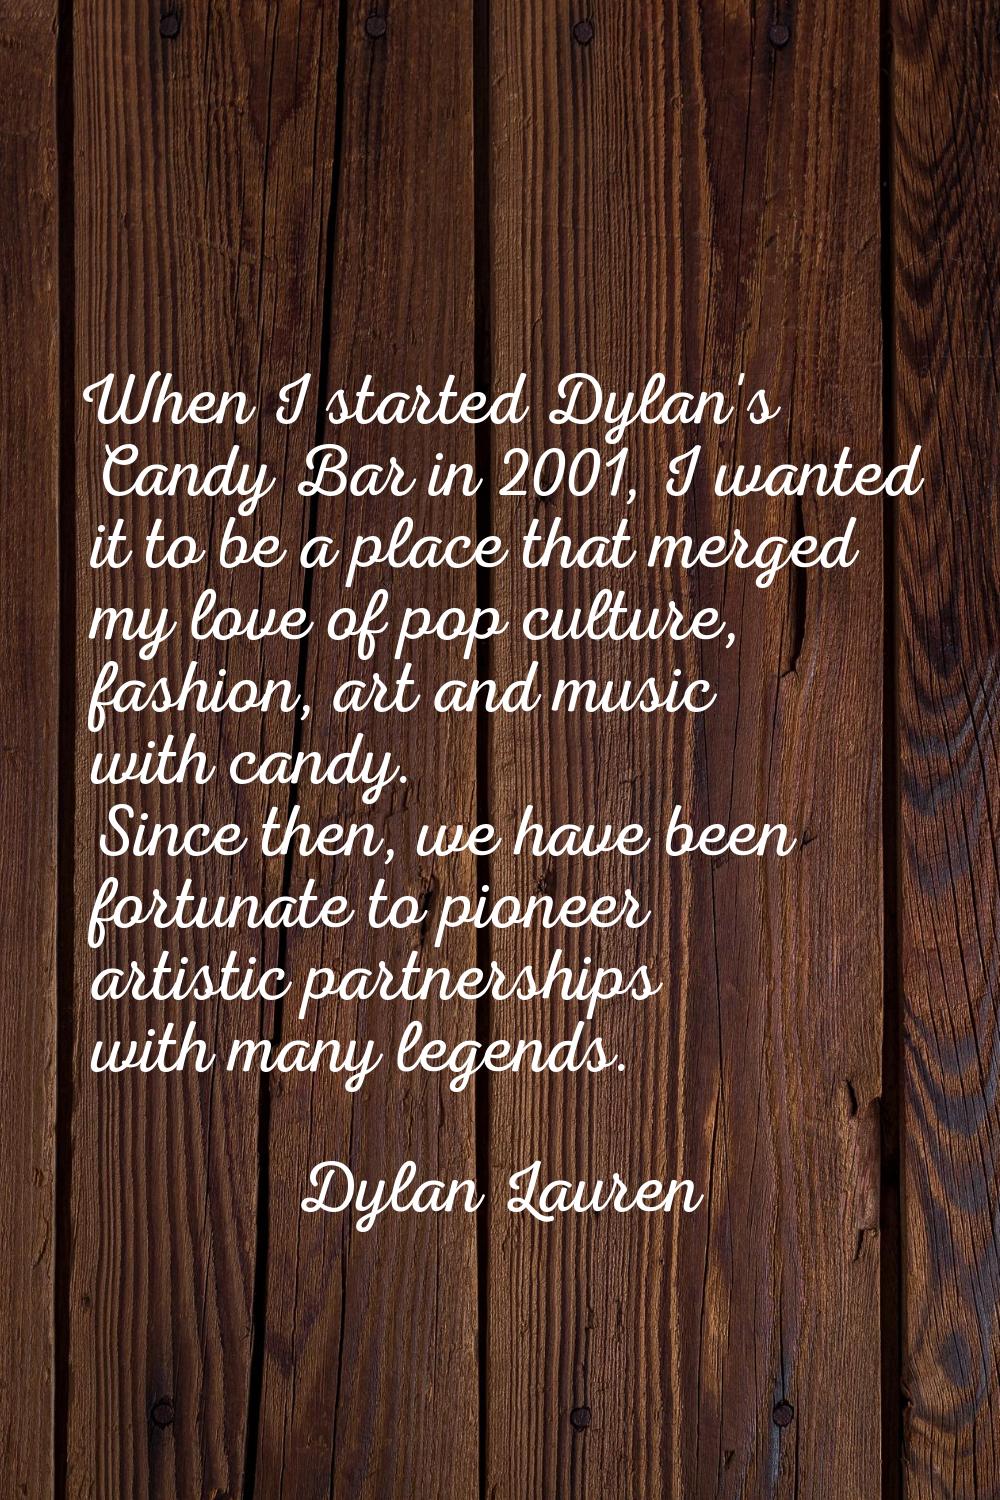 When I started Dylan's Candy Bar in 2001, I wanted it to be a place that merged my love of pop cult